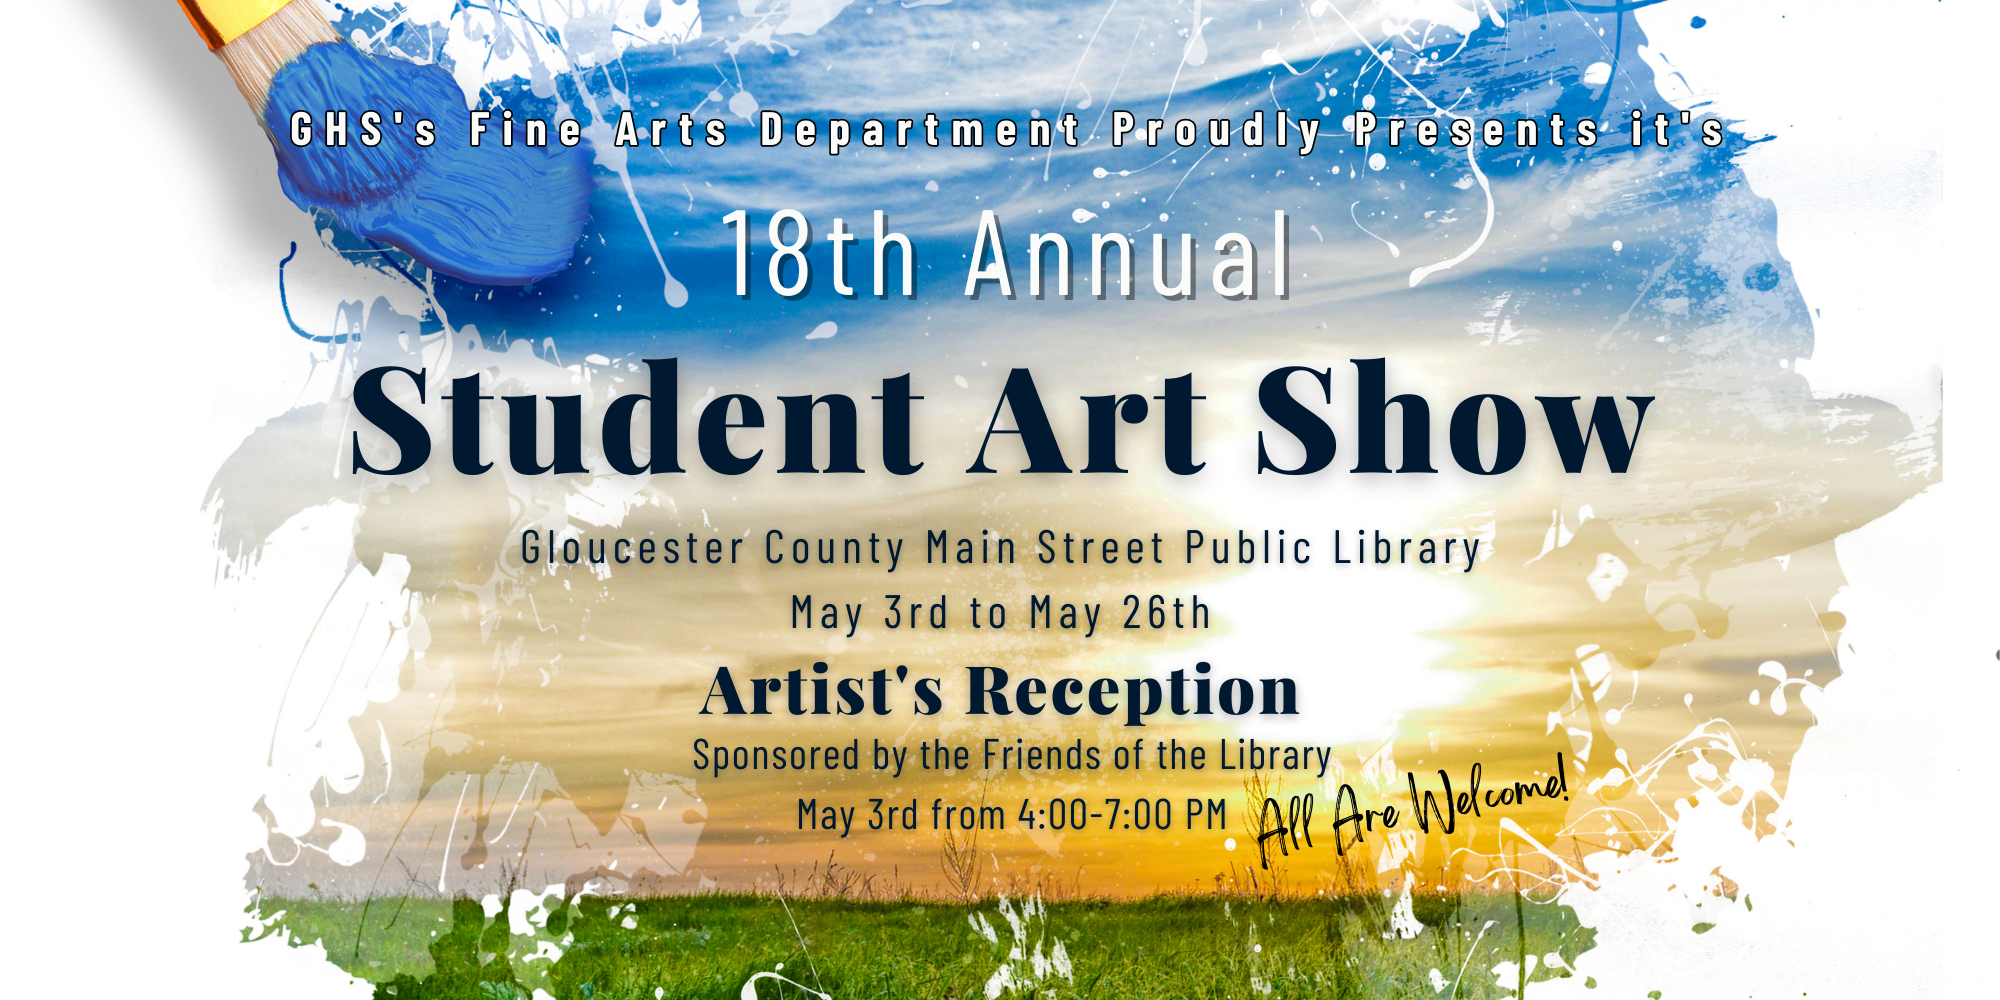 GHS's Fine Arts Department proudly presents it's 18th Annual Student Art Show Gloucester County Main Street Public Library  May 3rd to May 26th Artist Reception Sponsored by the Friends of the Library May 3rd from 4-7 PM All are welcome